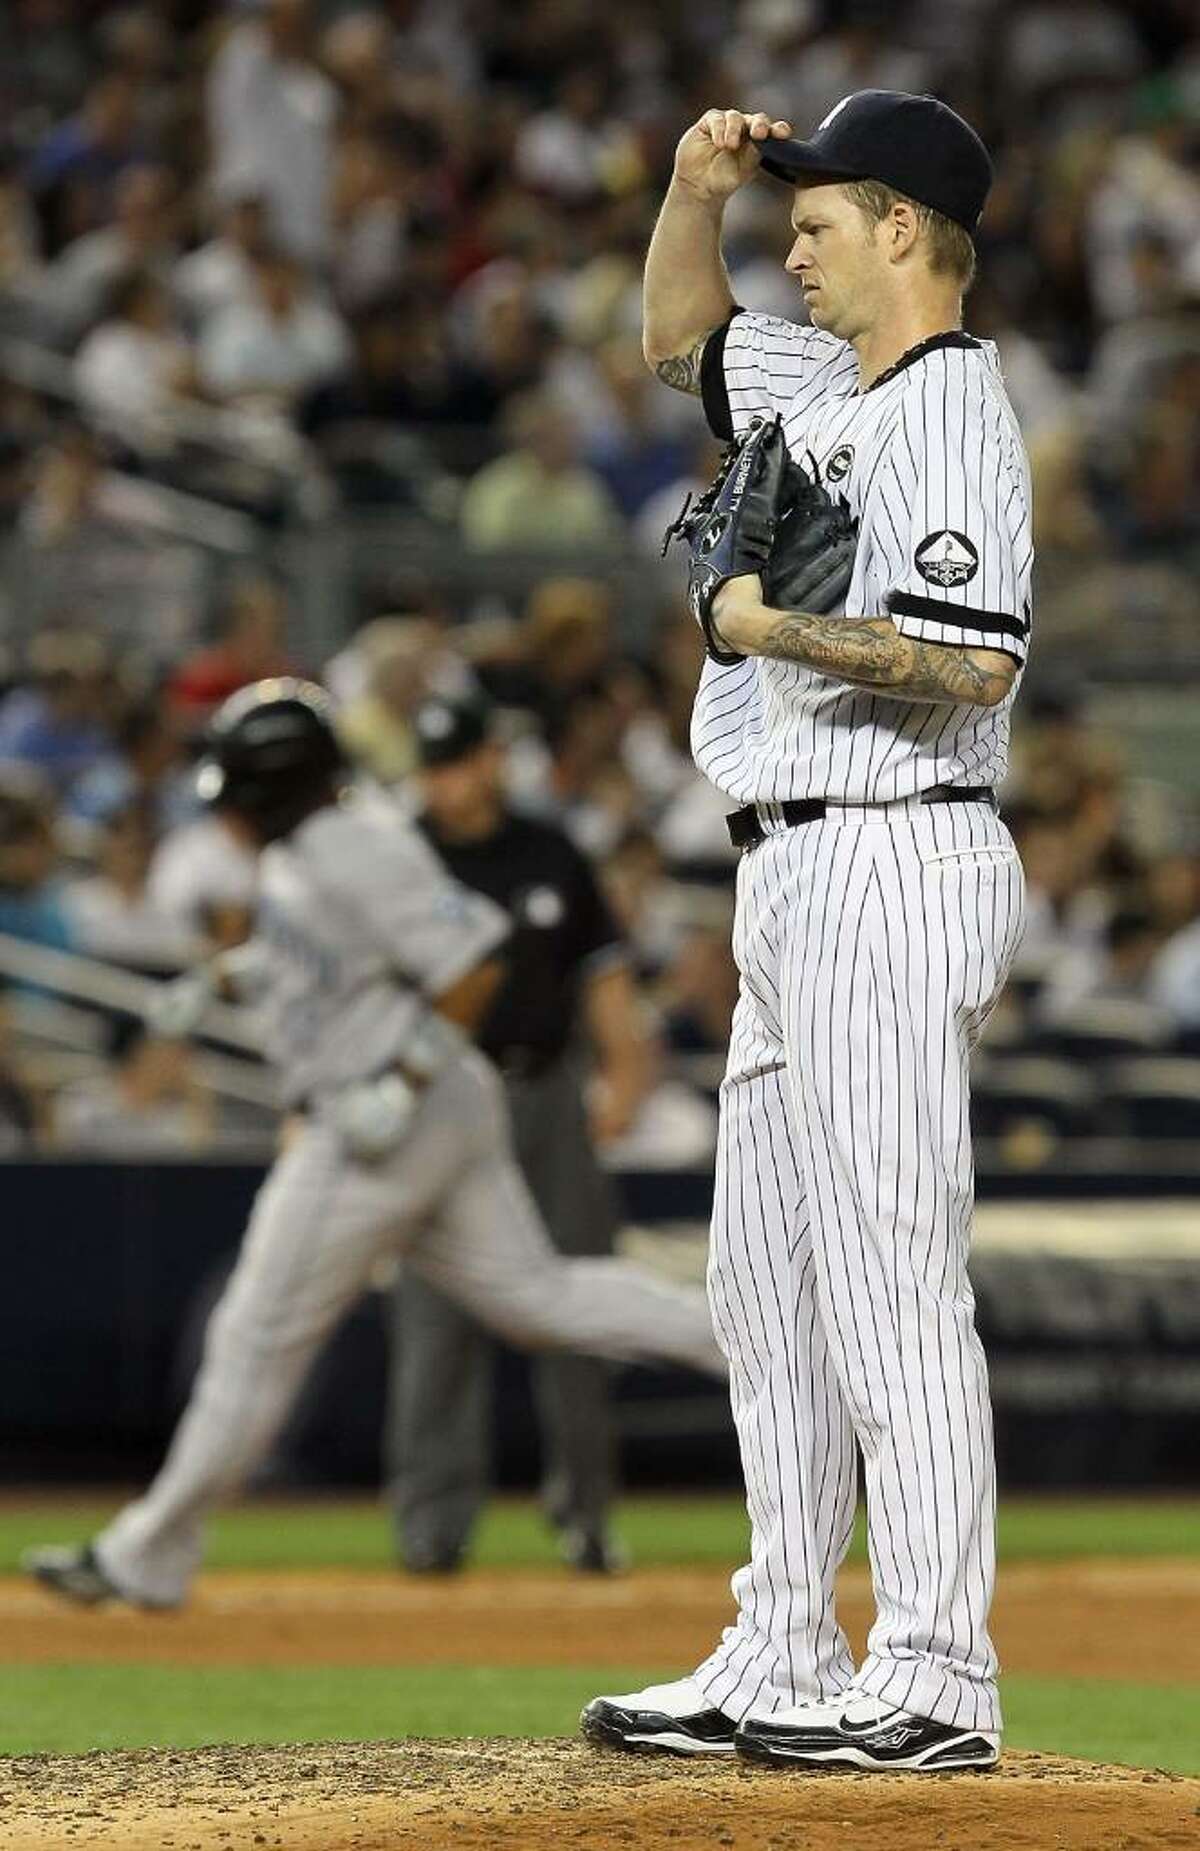 NEW YORK - AUGUST 02: A.J. Burnett #34 of the New York Yankees reacts during the fifth inning after surrendering a two run home run to Edwin Encarnacion #12 of the Toronto Blue Jays on August 2, 2010 at Yankee Stadium in the Bronx borough of New York City. (Photo by Jim McIsaac/Getty Images) *** Local Caption *** A.J. Burnett;Edwin Encarnacion